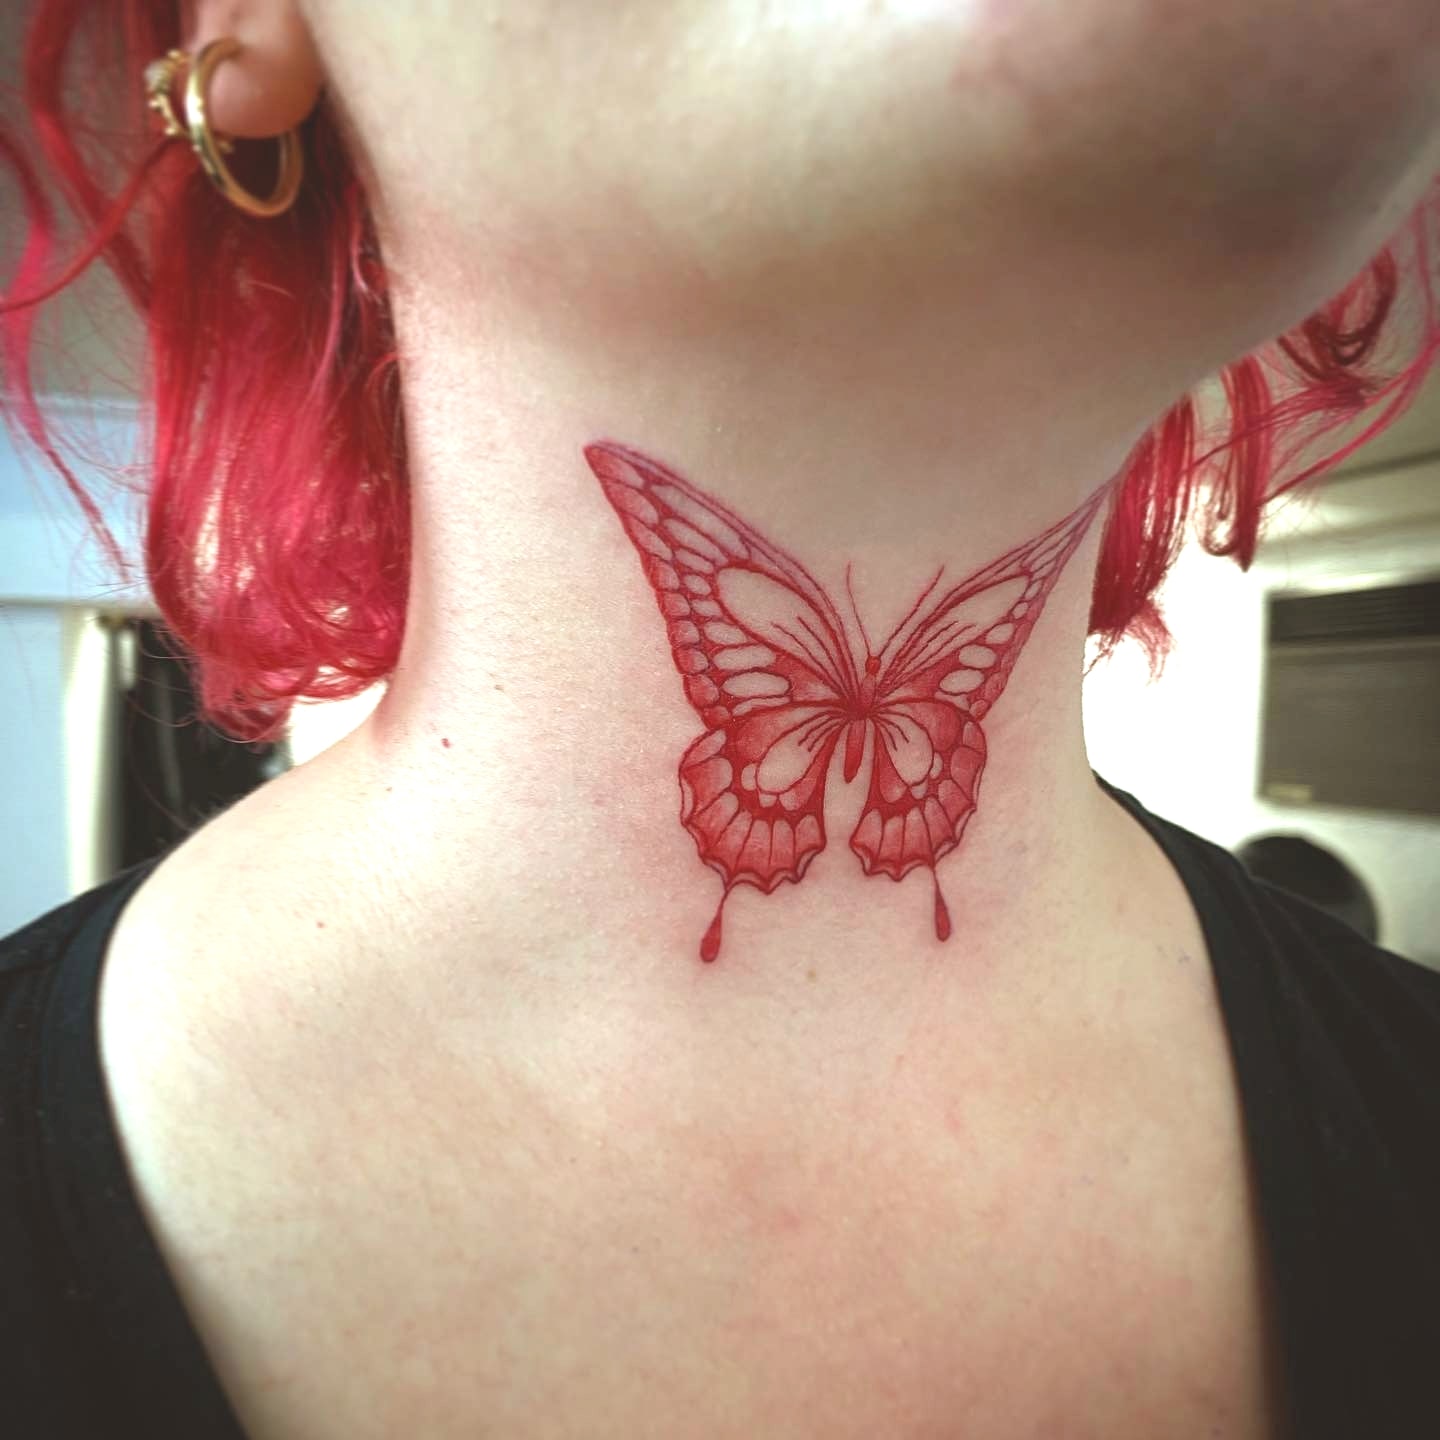 Big red butterfly tattoo on neck